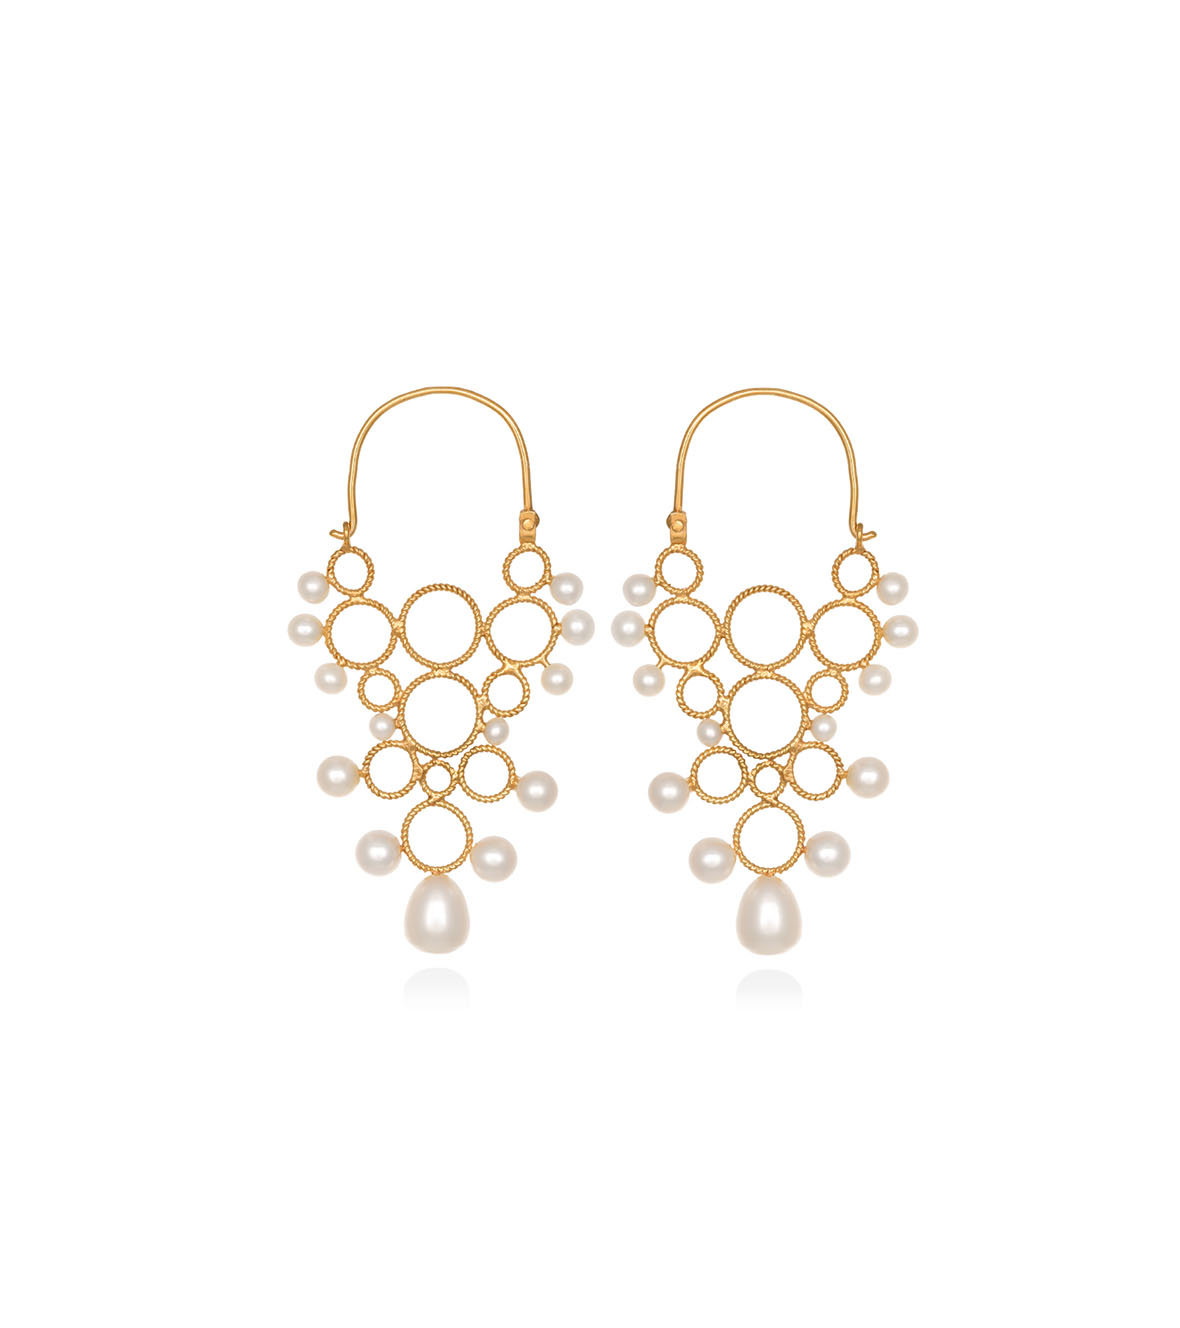 Medium Hoops with Pearls by Christina Soubli